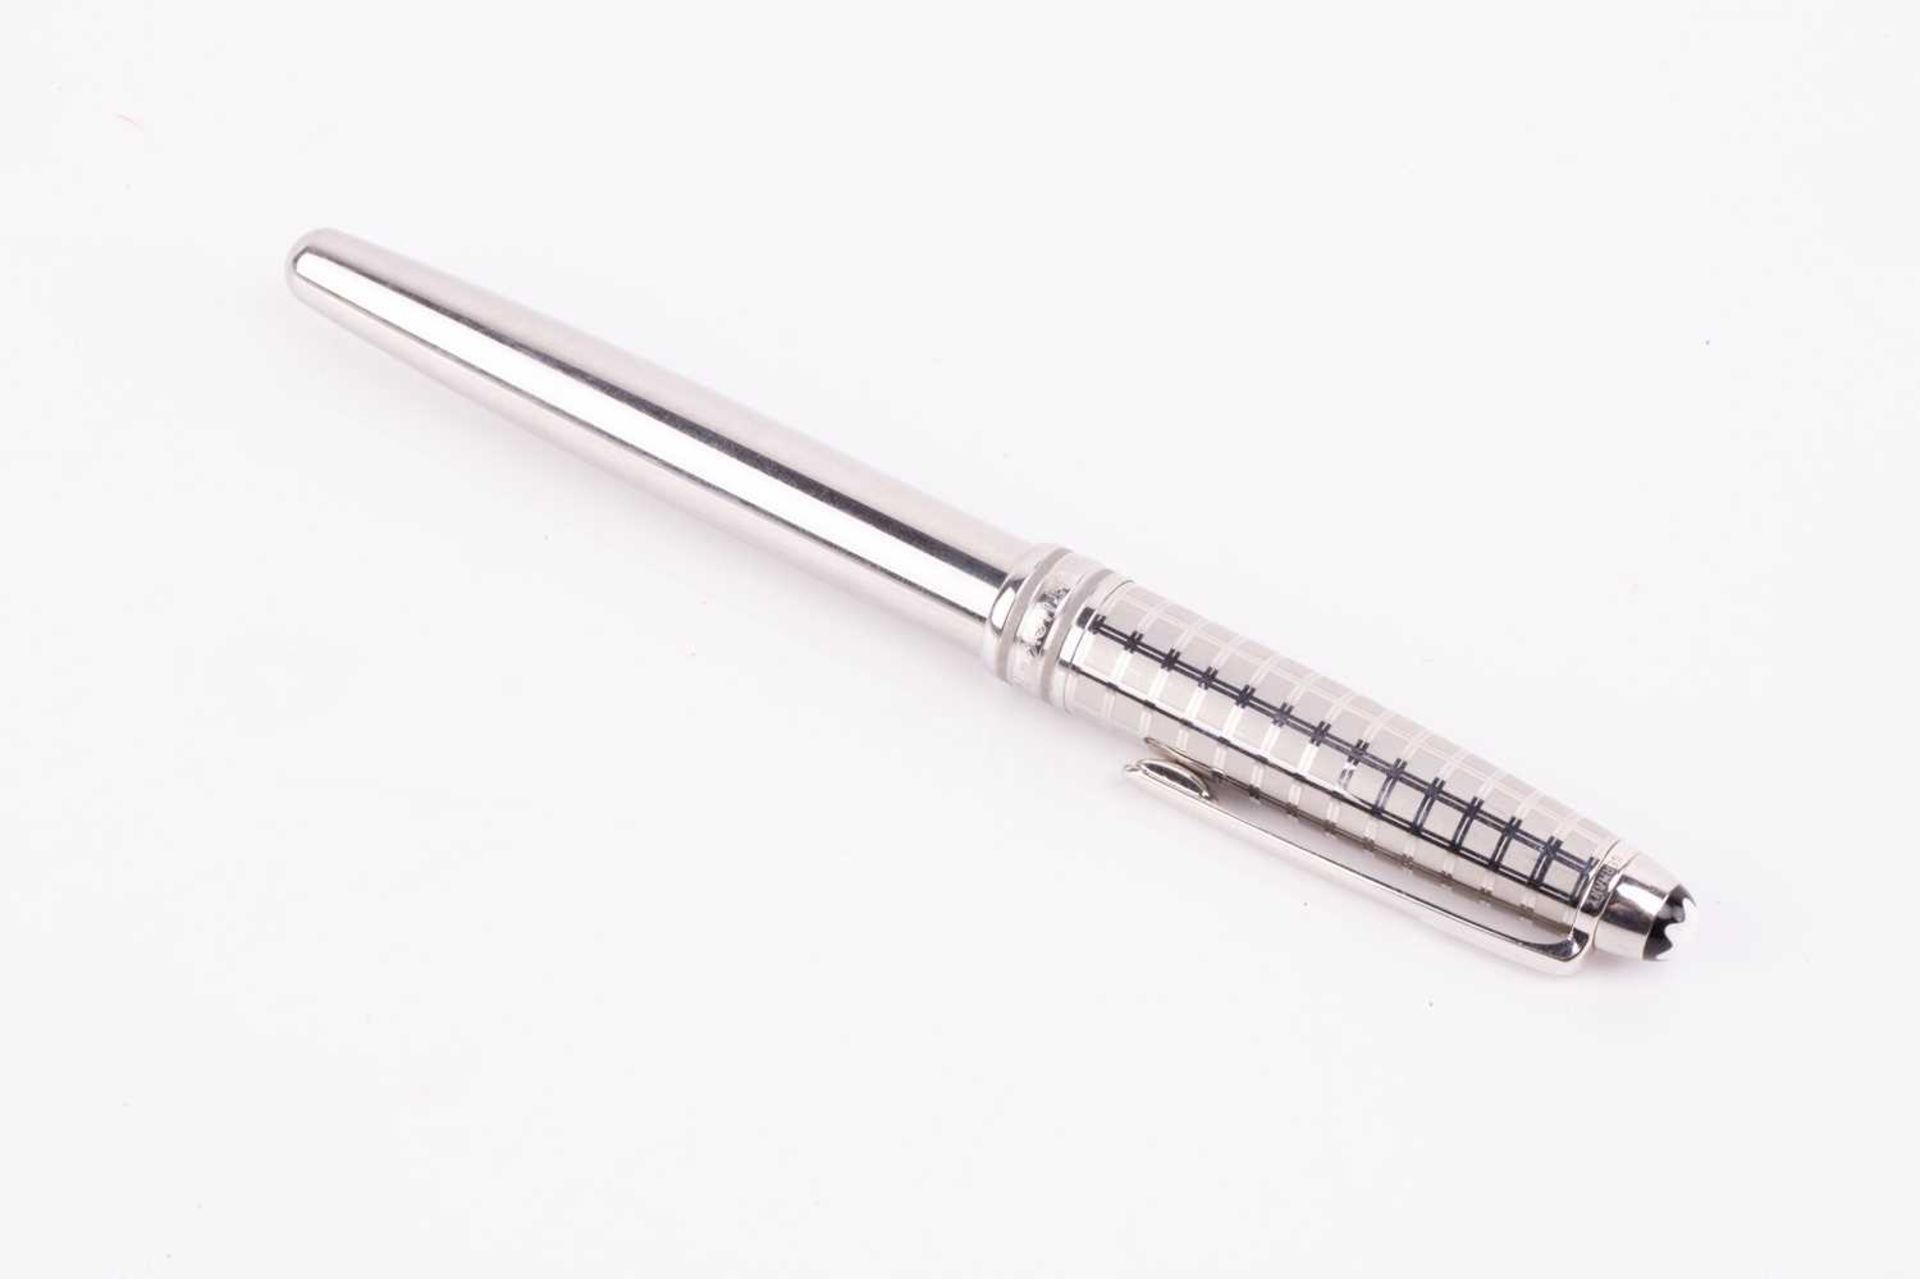 MontblancMeisterstück roller ball pen, the steel pull-off cap with inlaid emblem to the crown and - Image 3 of 6